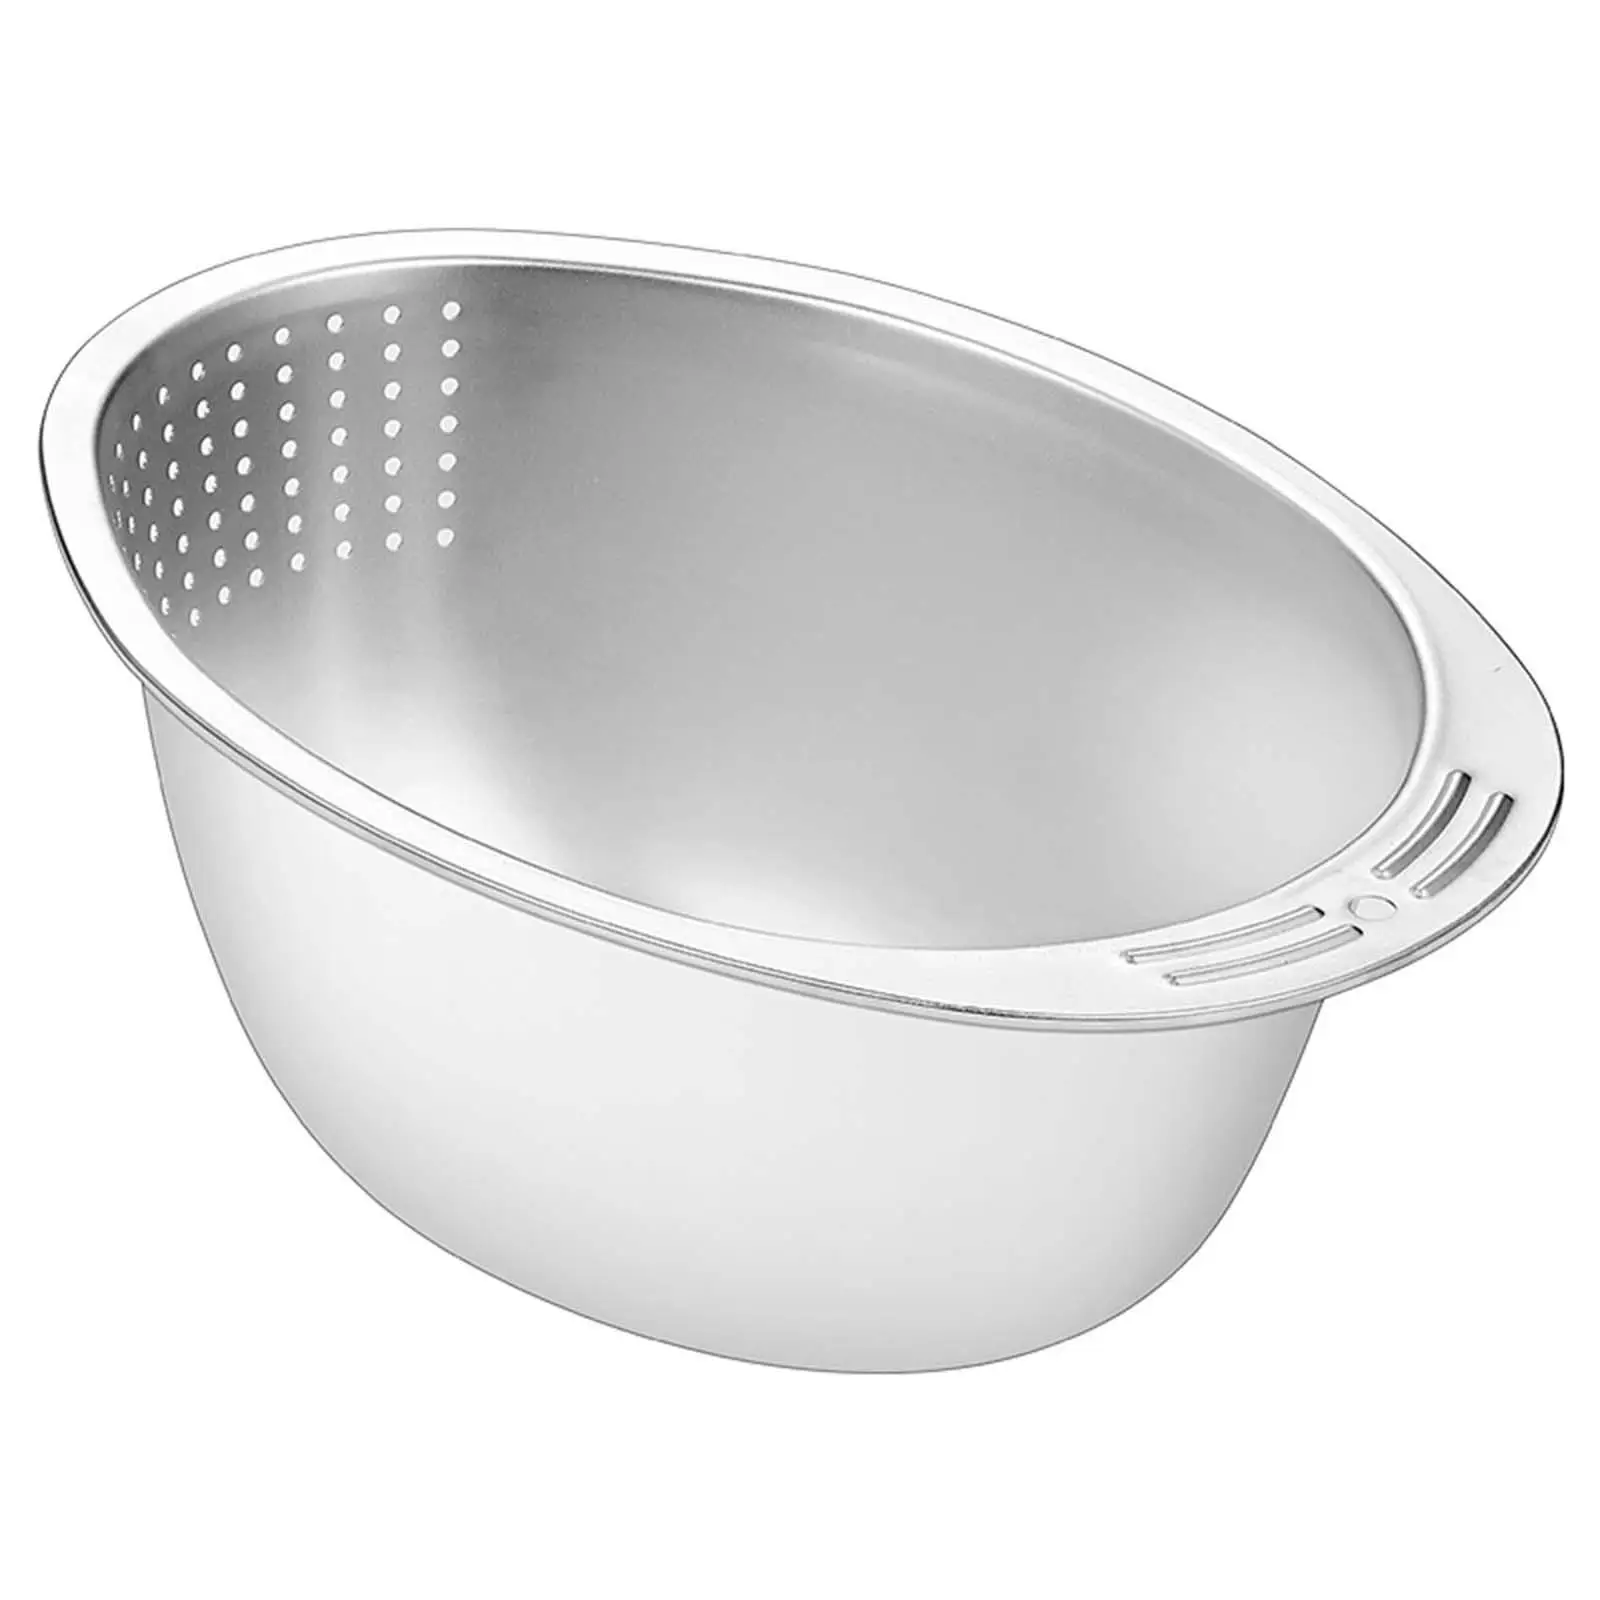 Slanted Rice Strainer Washing Bowl Cleaning Gadget 304 Stainless Steel Durable